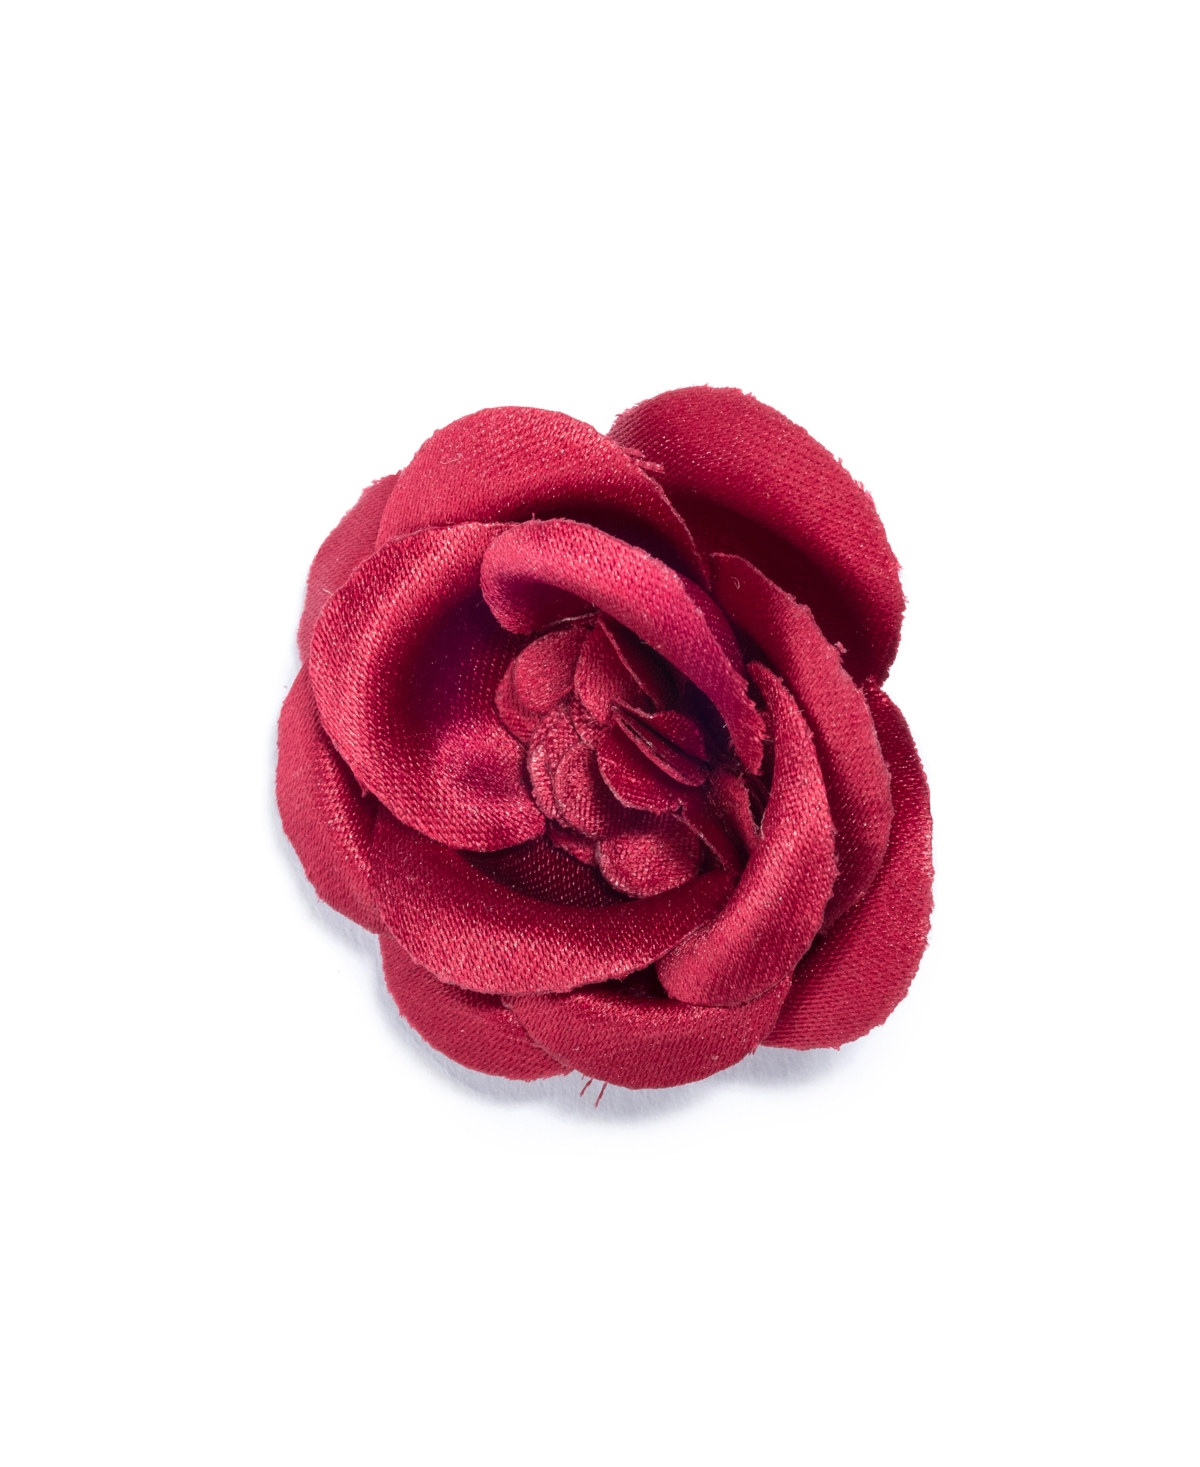 Hook and Albert Large Buttercup Lapel Flower - Red